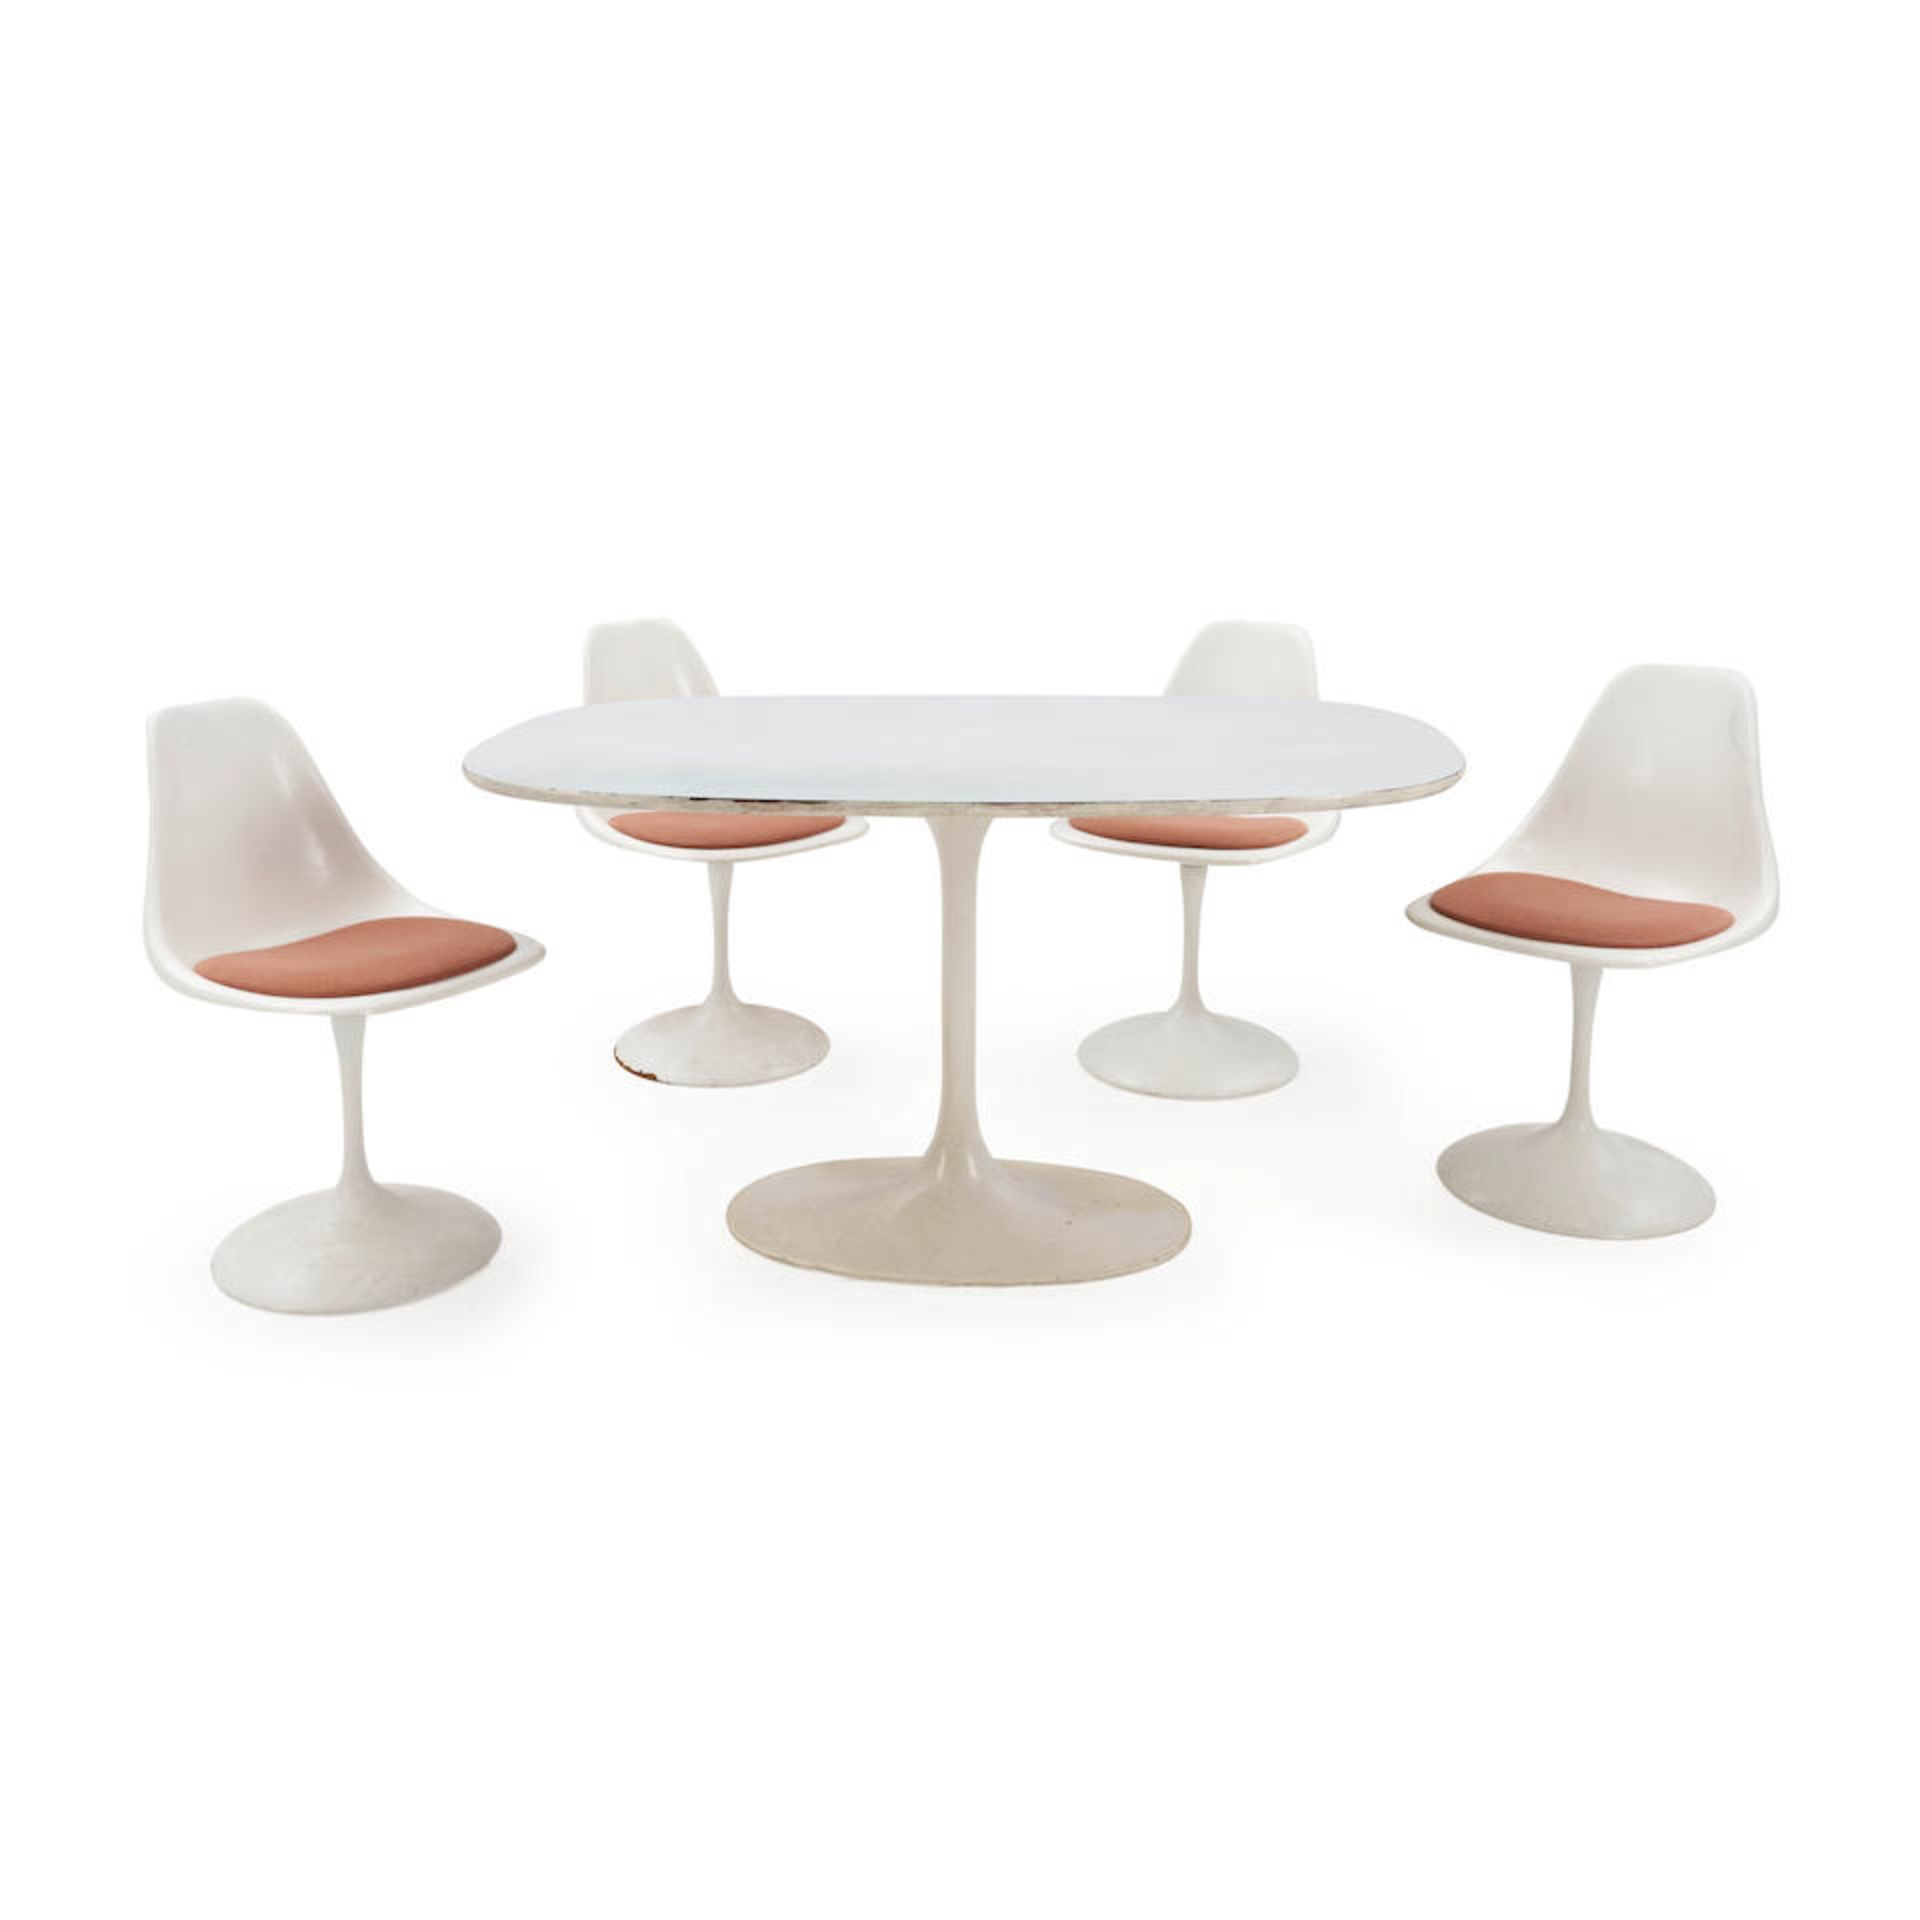 MID-CENTURY MODERN TULIP TABLE AND FOUR SWIVEL CHAIRS, United States, c. 1970, chairs, enameled ...